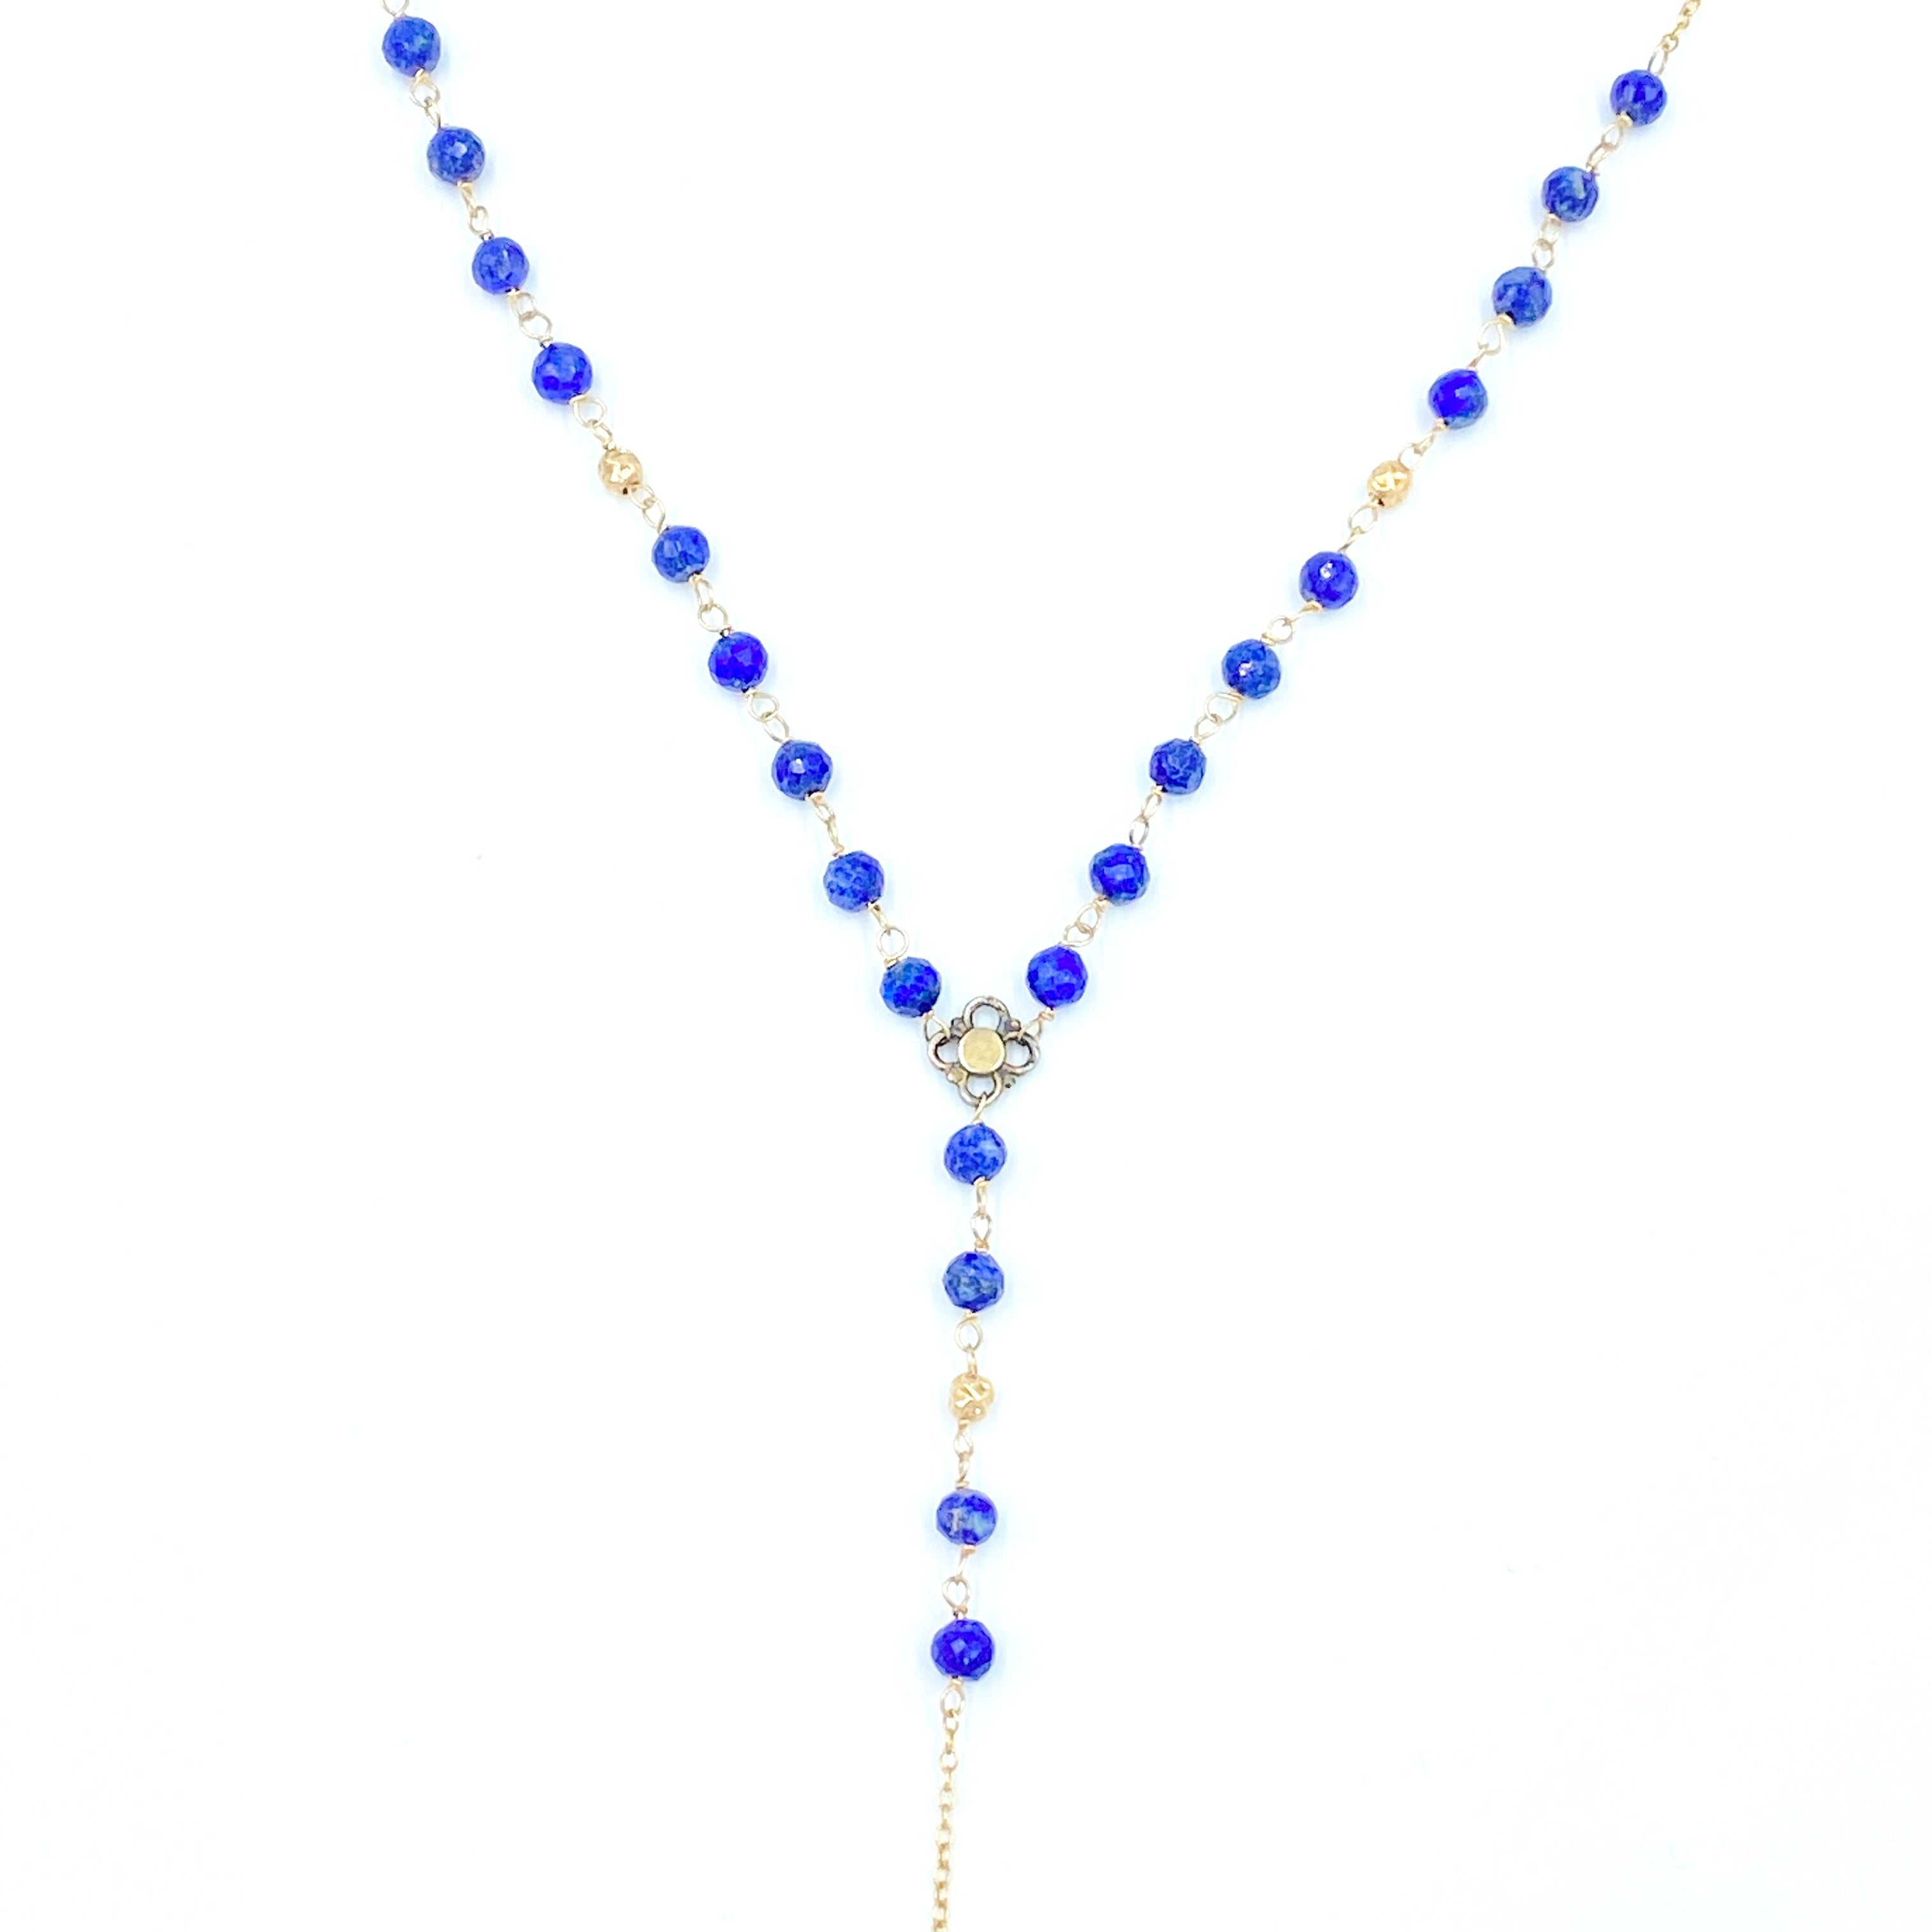 Joanna Bisley 14kt Goldfill and Lapis Necklace